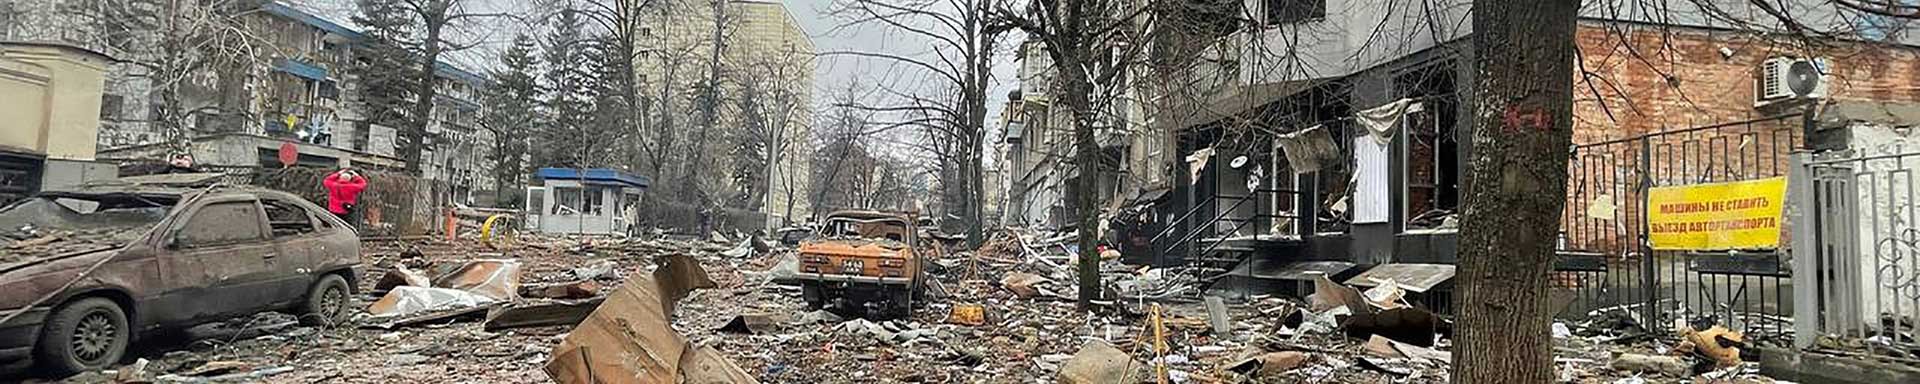 March 3, 2022: destroyed buildings on the streets of Kharkiv, Ukraine.  — Photo by YuriiKochubey